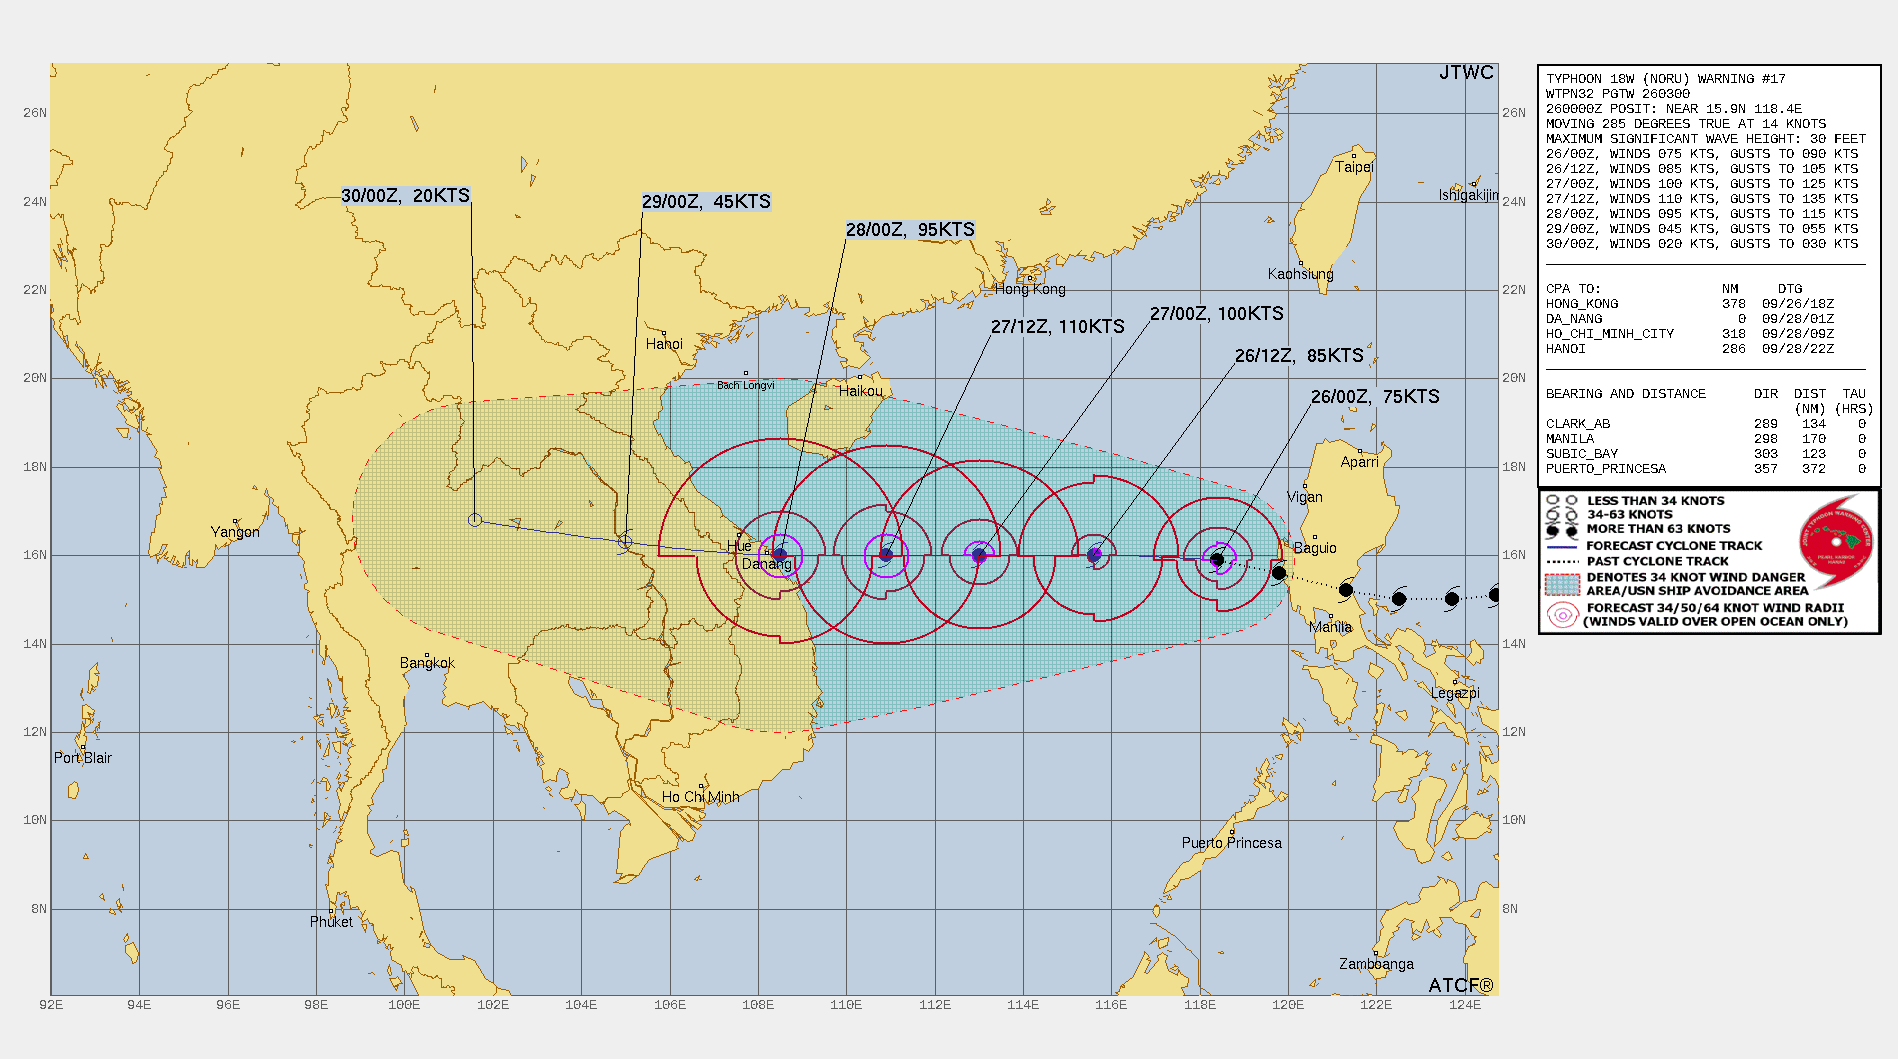 FORECAST REASONING.  SIGNIFICANT FORECAST CHANGES: THERE ARE NO SIGNIFICANT CHANGES TO THE FORECAST FROM THE PREVIOUS WARNING.  FORECAST DISCUSSION: TY 18W IS FORECAST TO TRACK WESTWARD THROUGH THE FORECAST PERIOD UNDER THE STEERING INFLUENCE OF THE STR  POSITIONED TO THE NORTH, MAKING LANDFALL NEAR DA NANG, VIETNAM NEAR  TAU 48. TY 18W IS FORECAST TO RAPIDLY INTENSIFY FROM TAU 24 TO TAU 48  UNDER IMPROVING UPPER-LEVEL CONDITIONS TO A PEAK OF 110 KNOTS. AFTER  TAU 48, THE SYSTEM WILL WEAKEN AS VERTICAL WIND SHEAR INCREASES AND  THE SYSTEM TRACKS OVER SOUTHEAST ASIA WITH DISSIPATION EXPECTED BY  TAU 96.